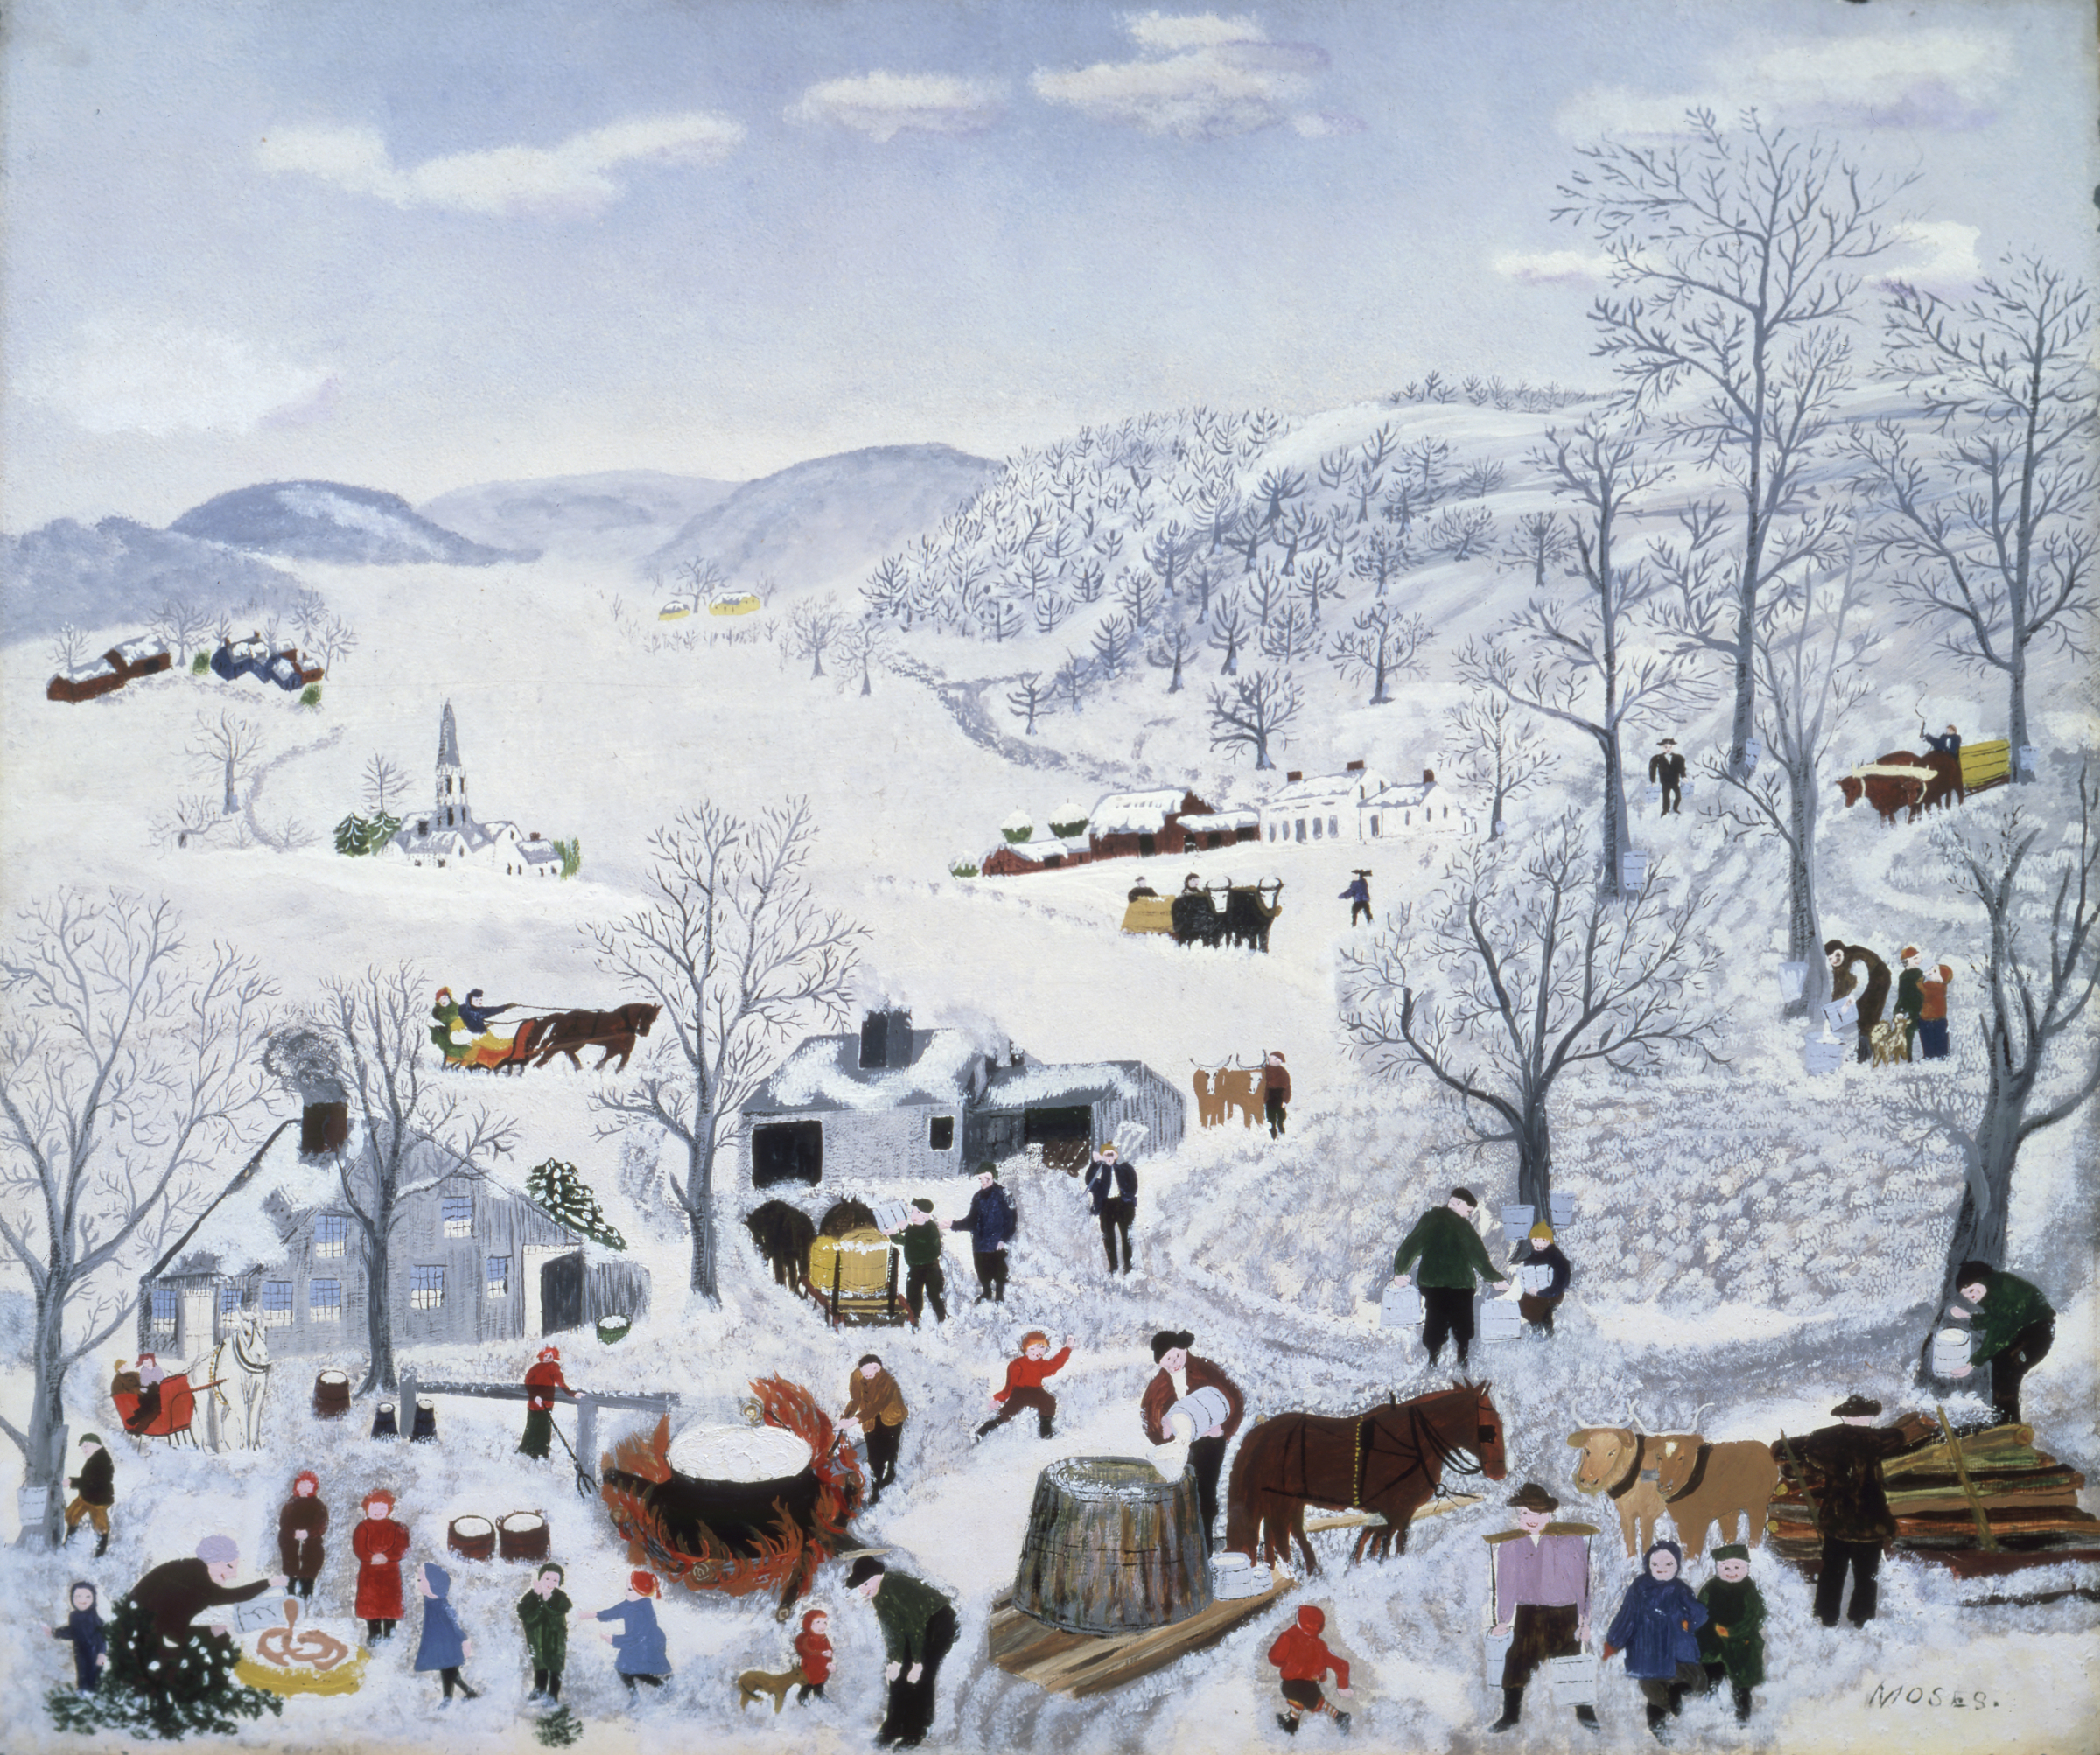 This a painting by Grandma Moses of a bustling countryside during winter.